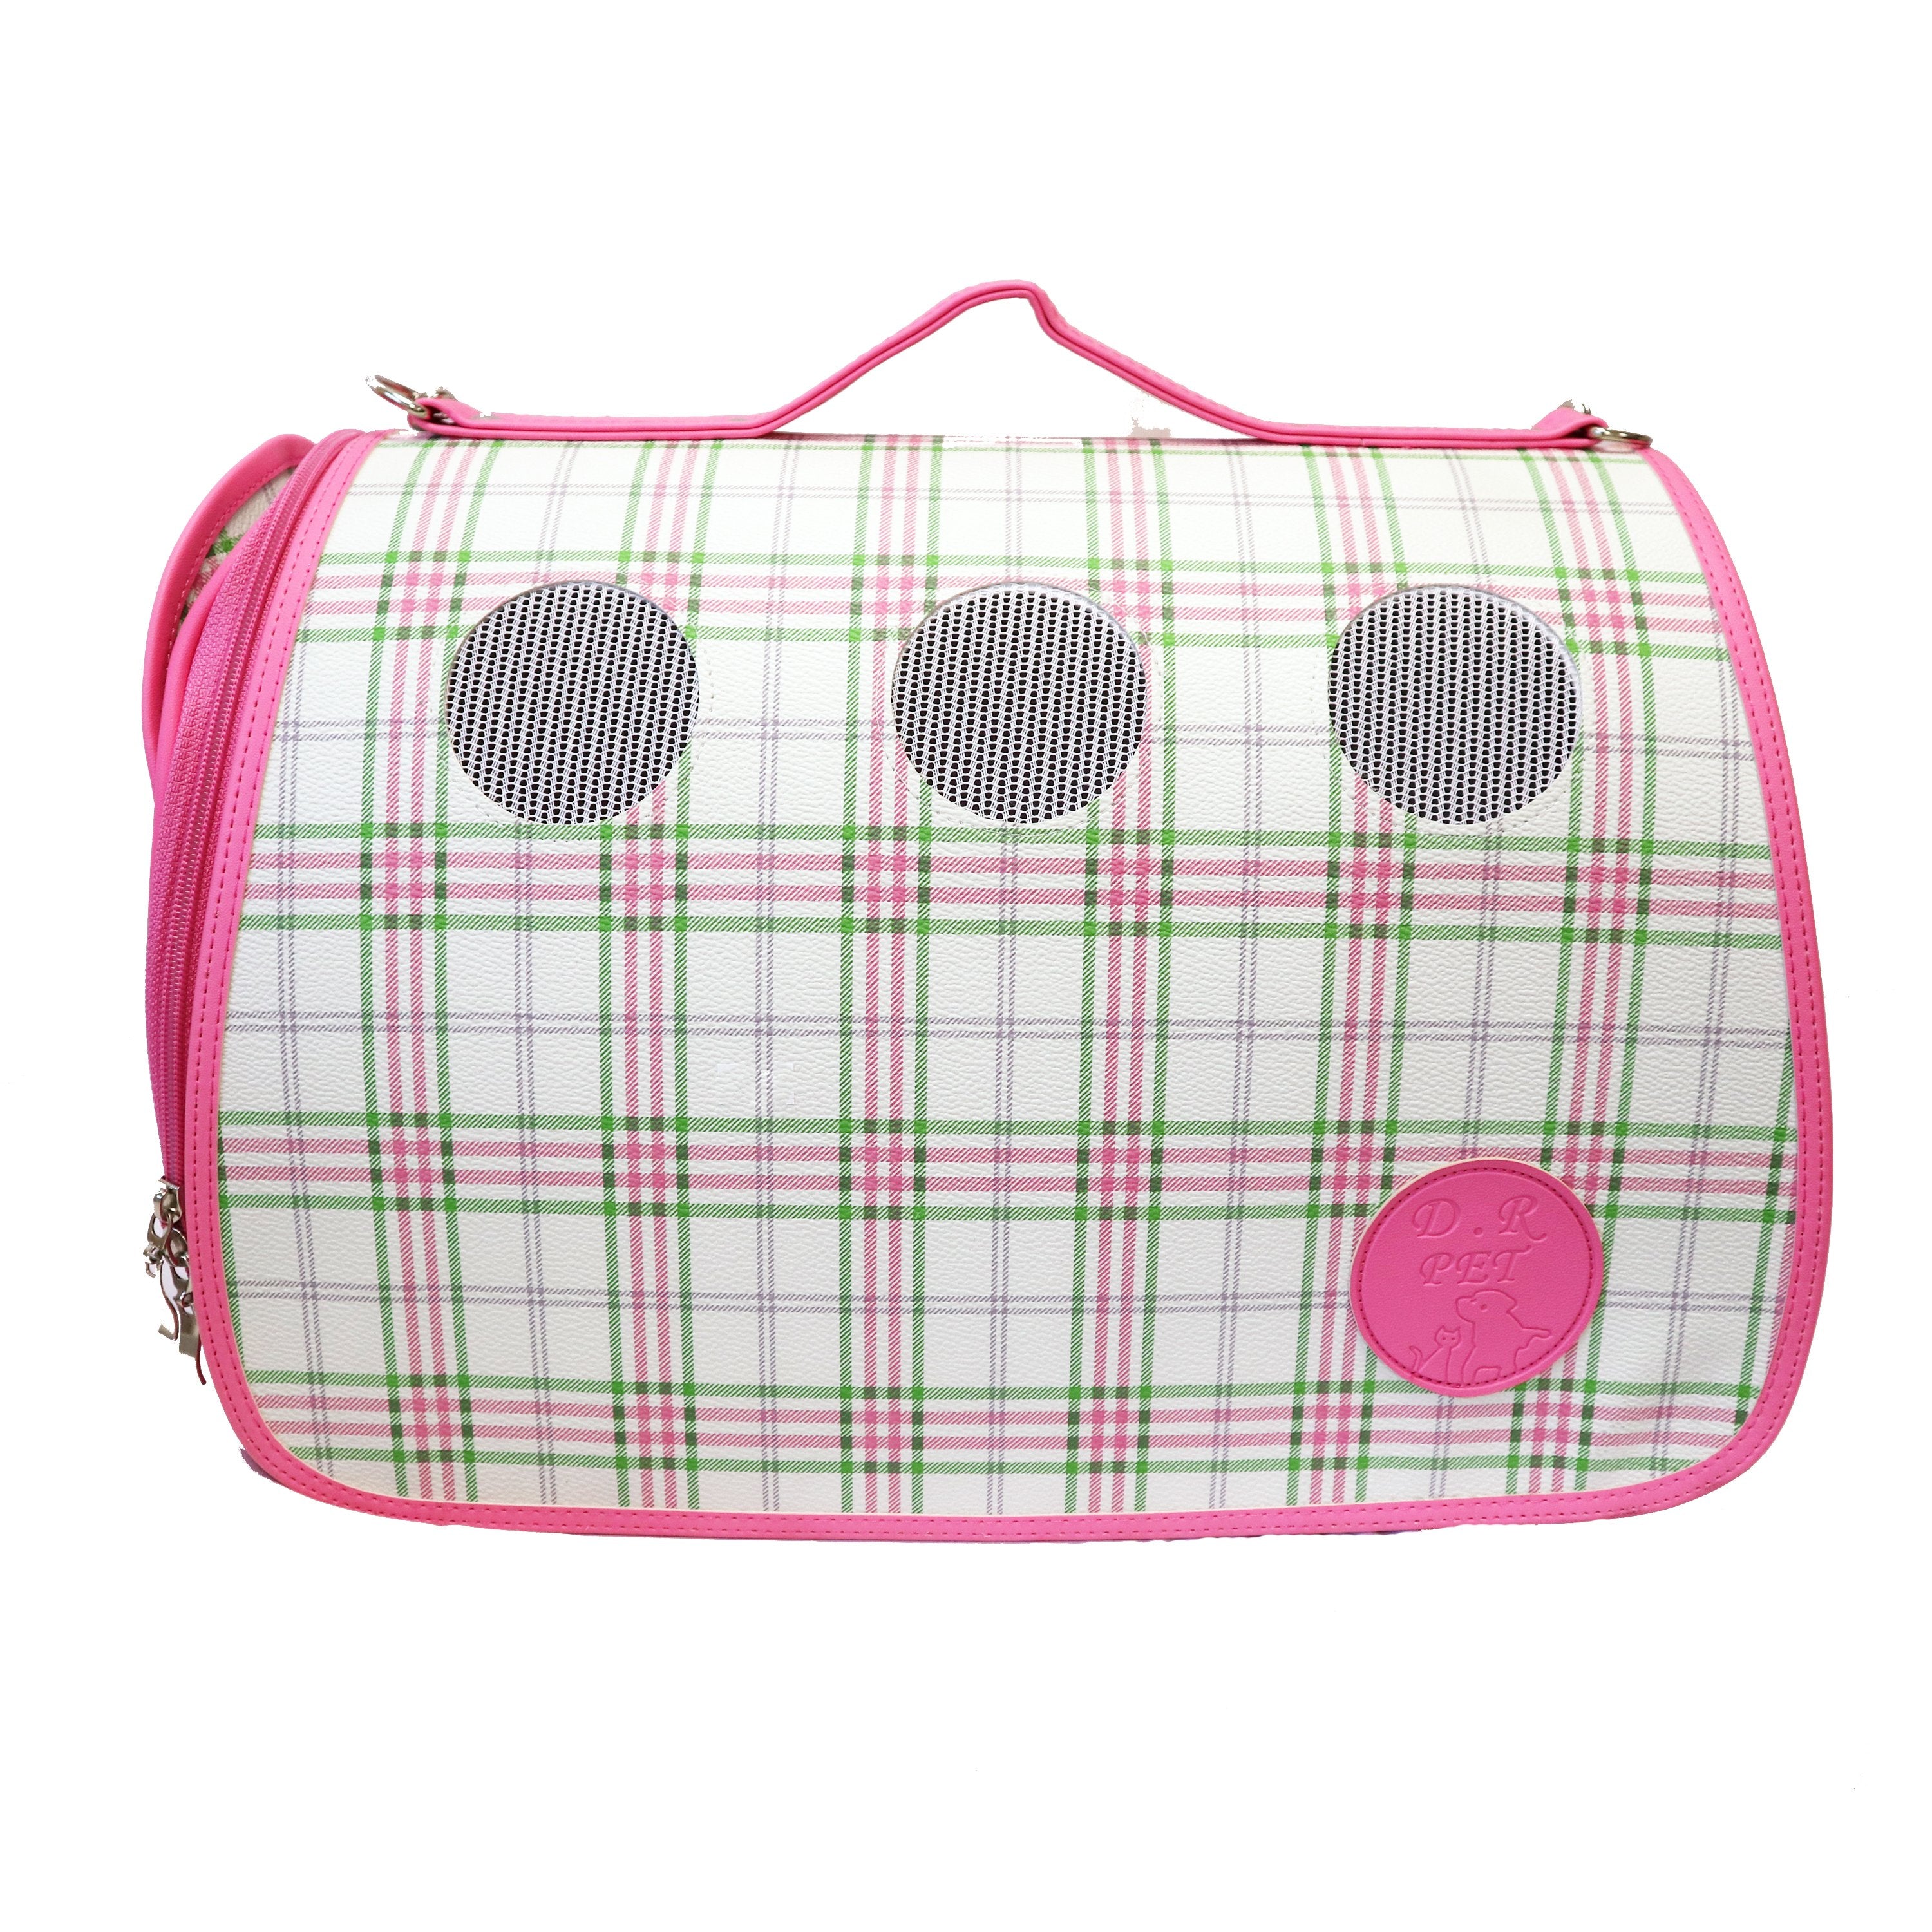 Luxurious Bubblegum Pink Plaid Small Carrier for Small Dogs and Cats. Breathable mesh circles & side panels for protective visibility. Leather Case with top handle and strap with padding